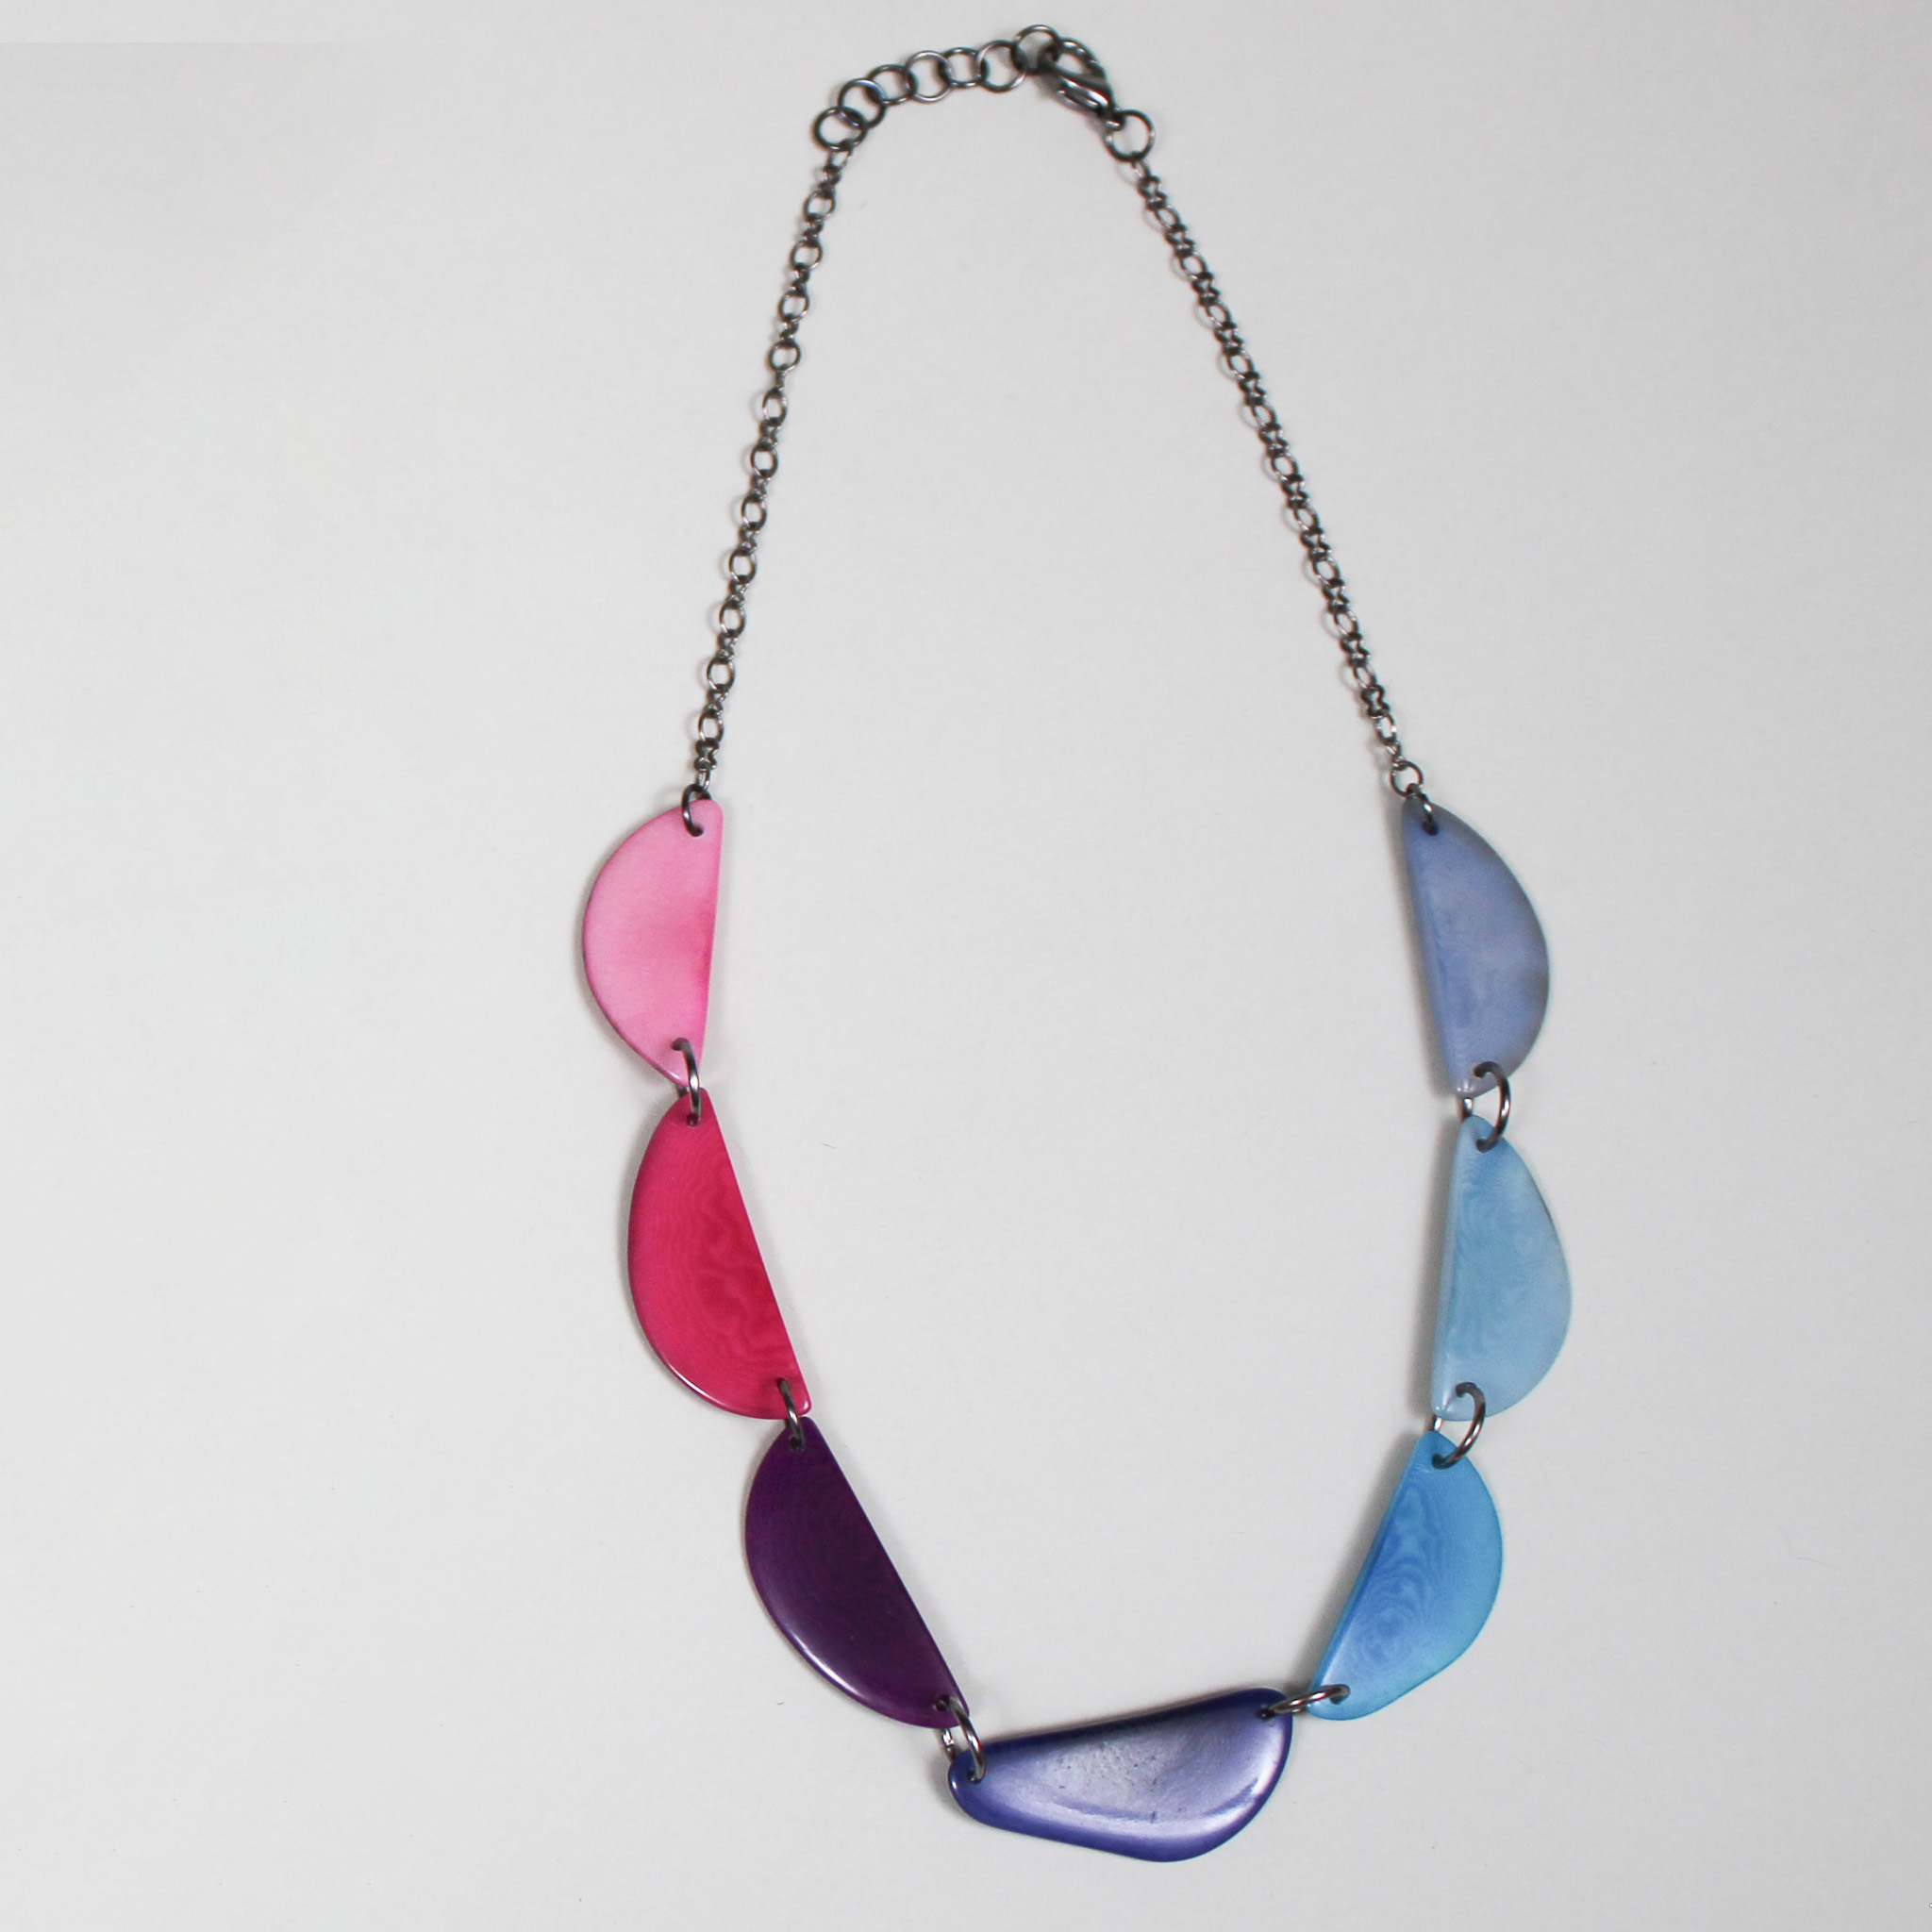 7-Piece Ombre Crescent-Shaped Tagua Necklace